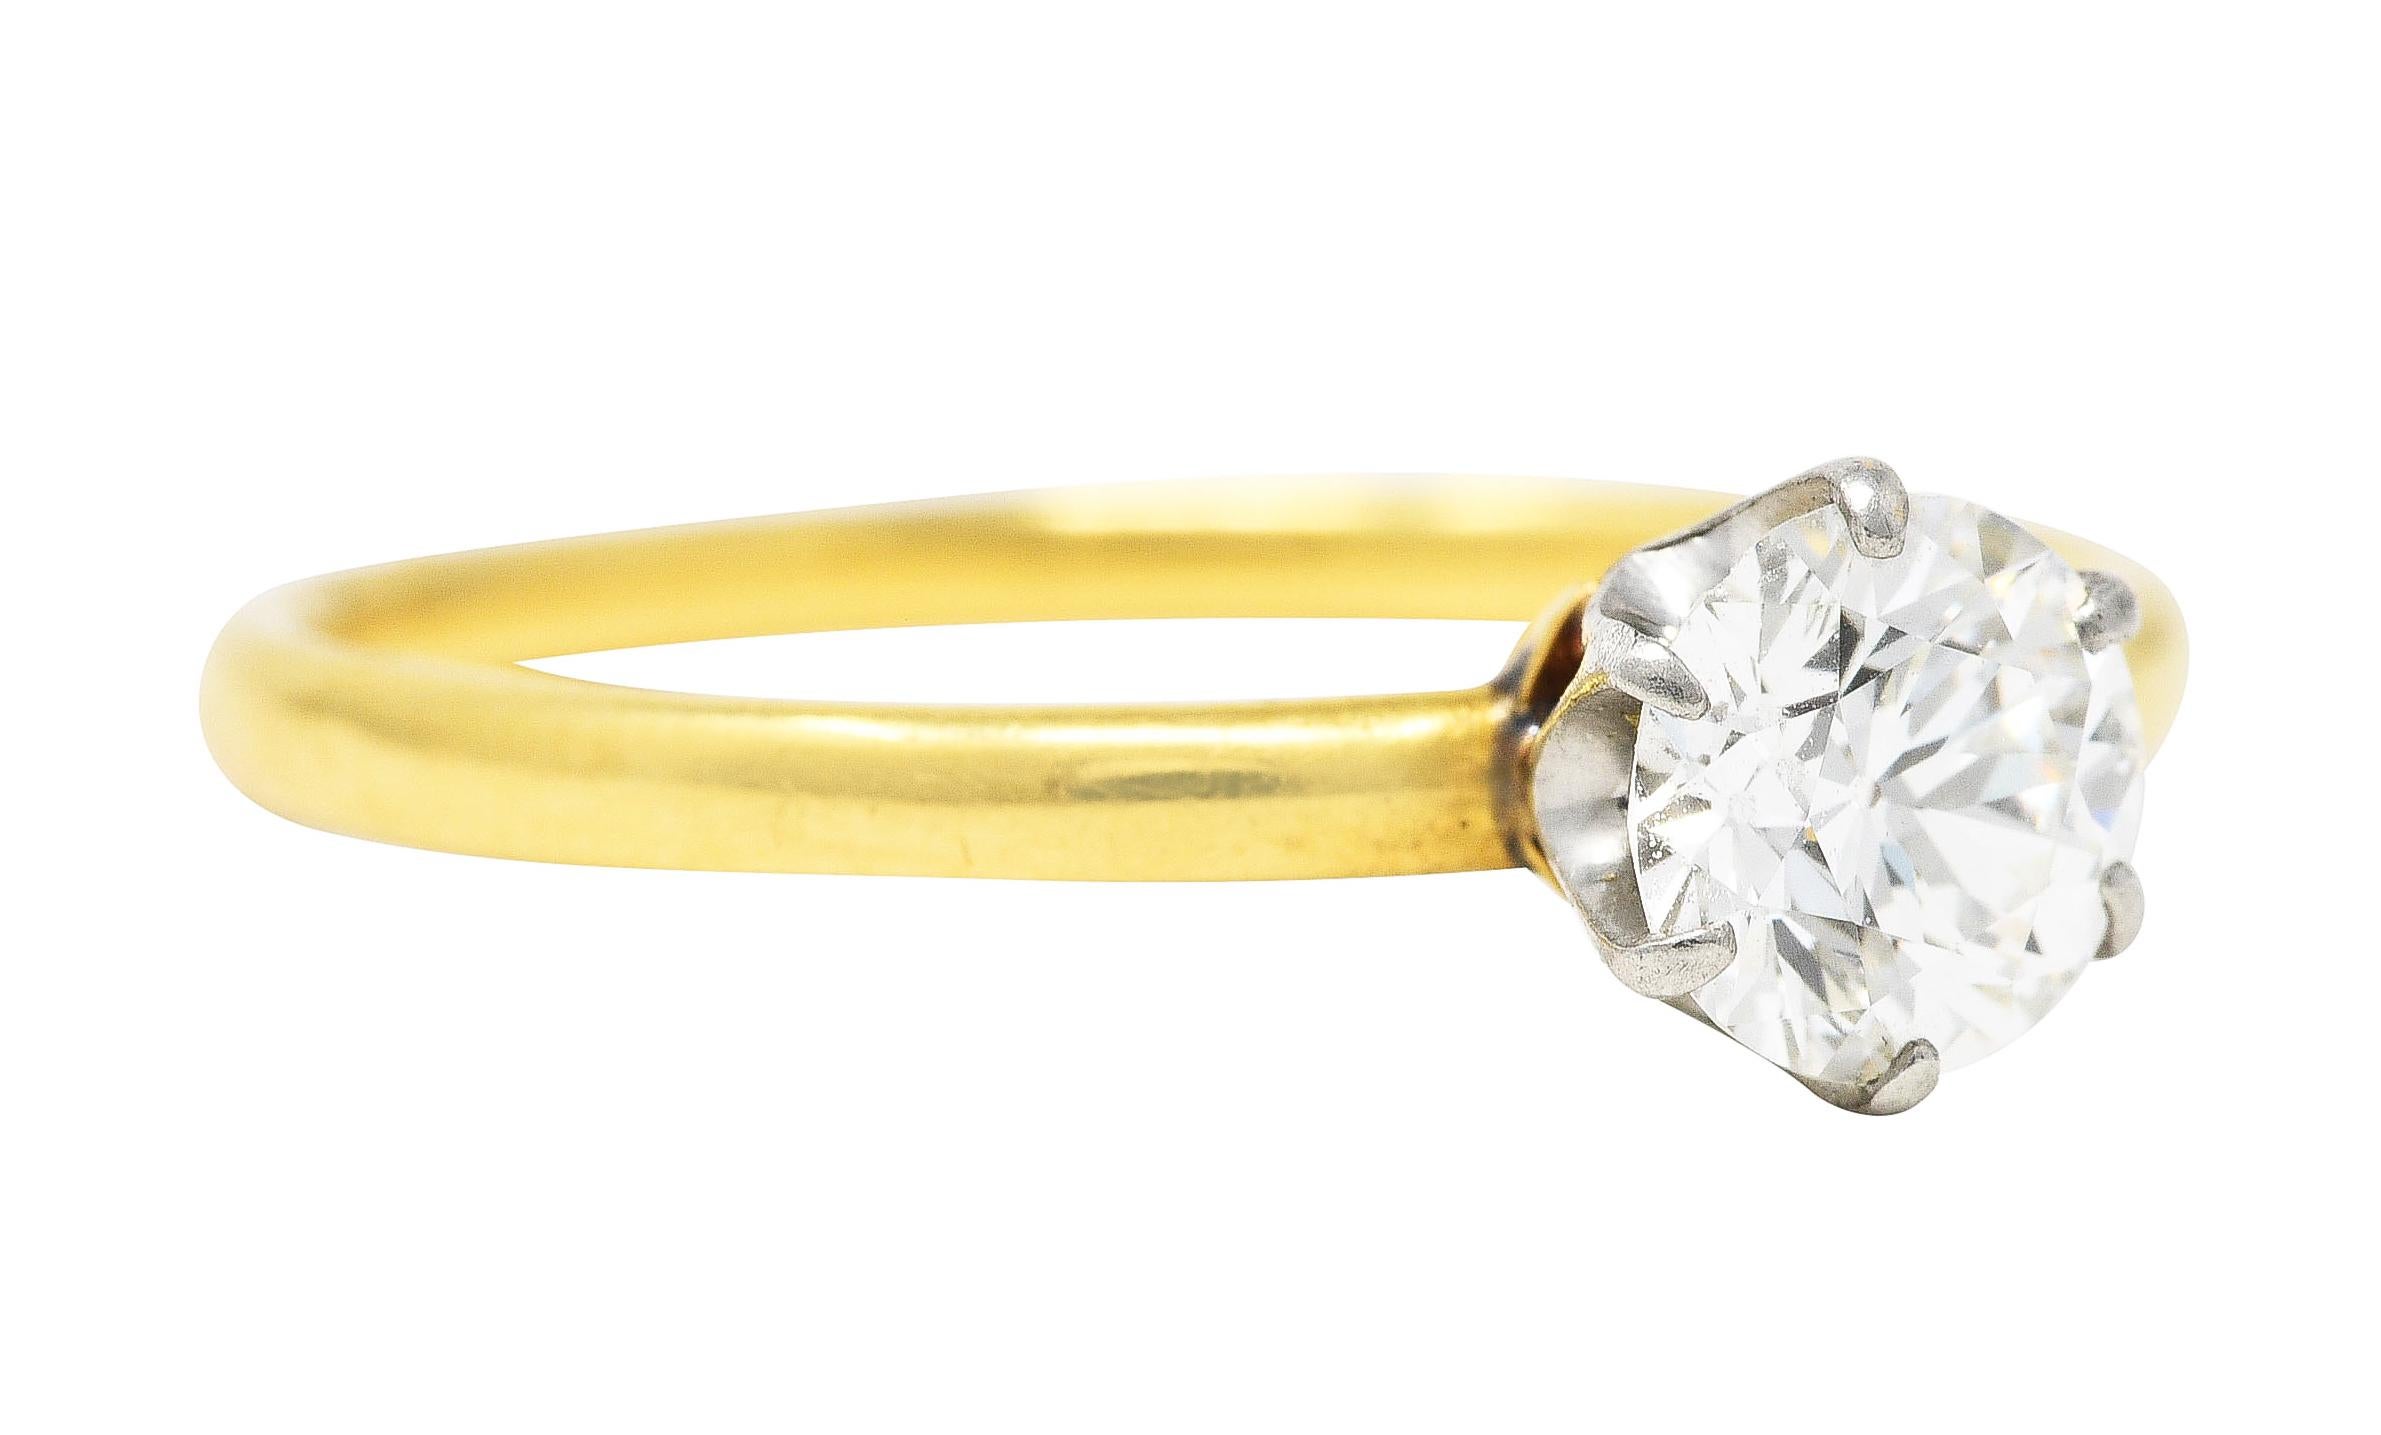 Designed as the iconic Tiffany setting with a six prong platinum head. Featuring an old European cut diamond weighing approximately 0.61 carat - H color with VS2 clarity. Completed by a sleek polished yellow gold shank. Tested as platinum and 18